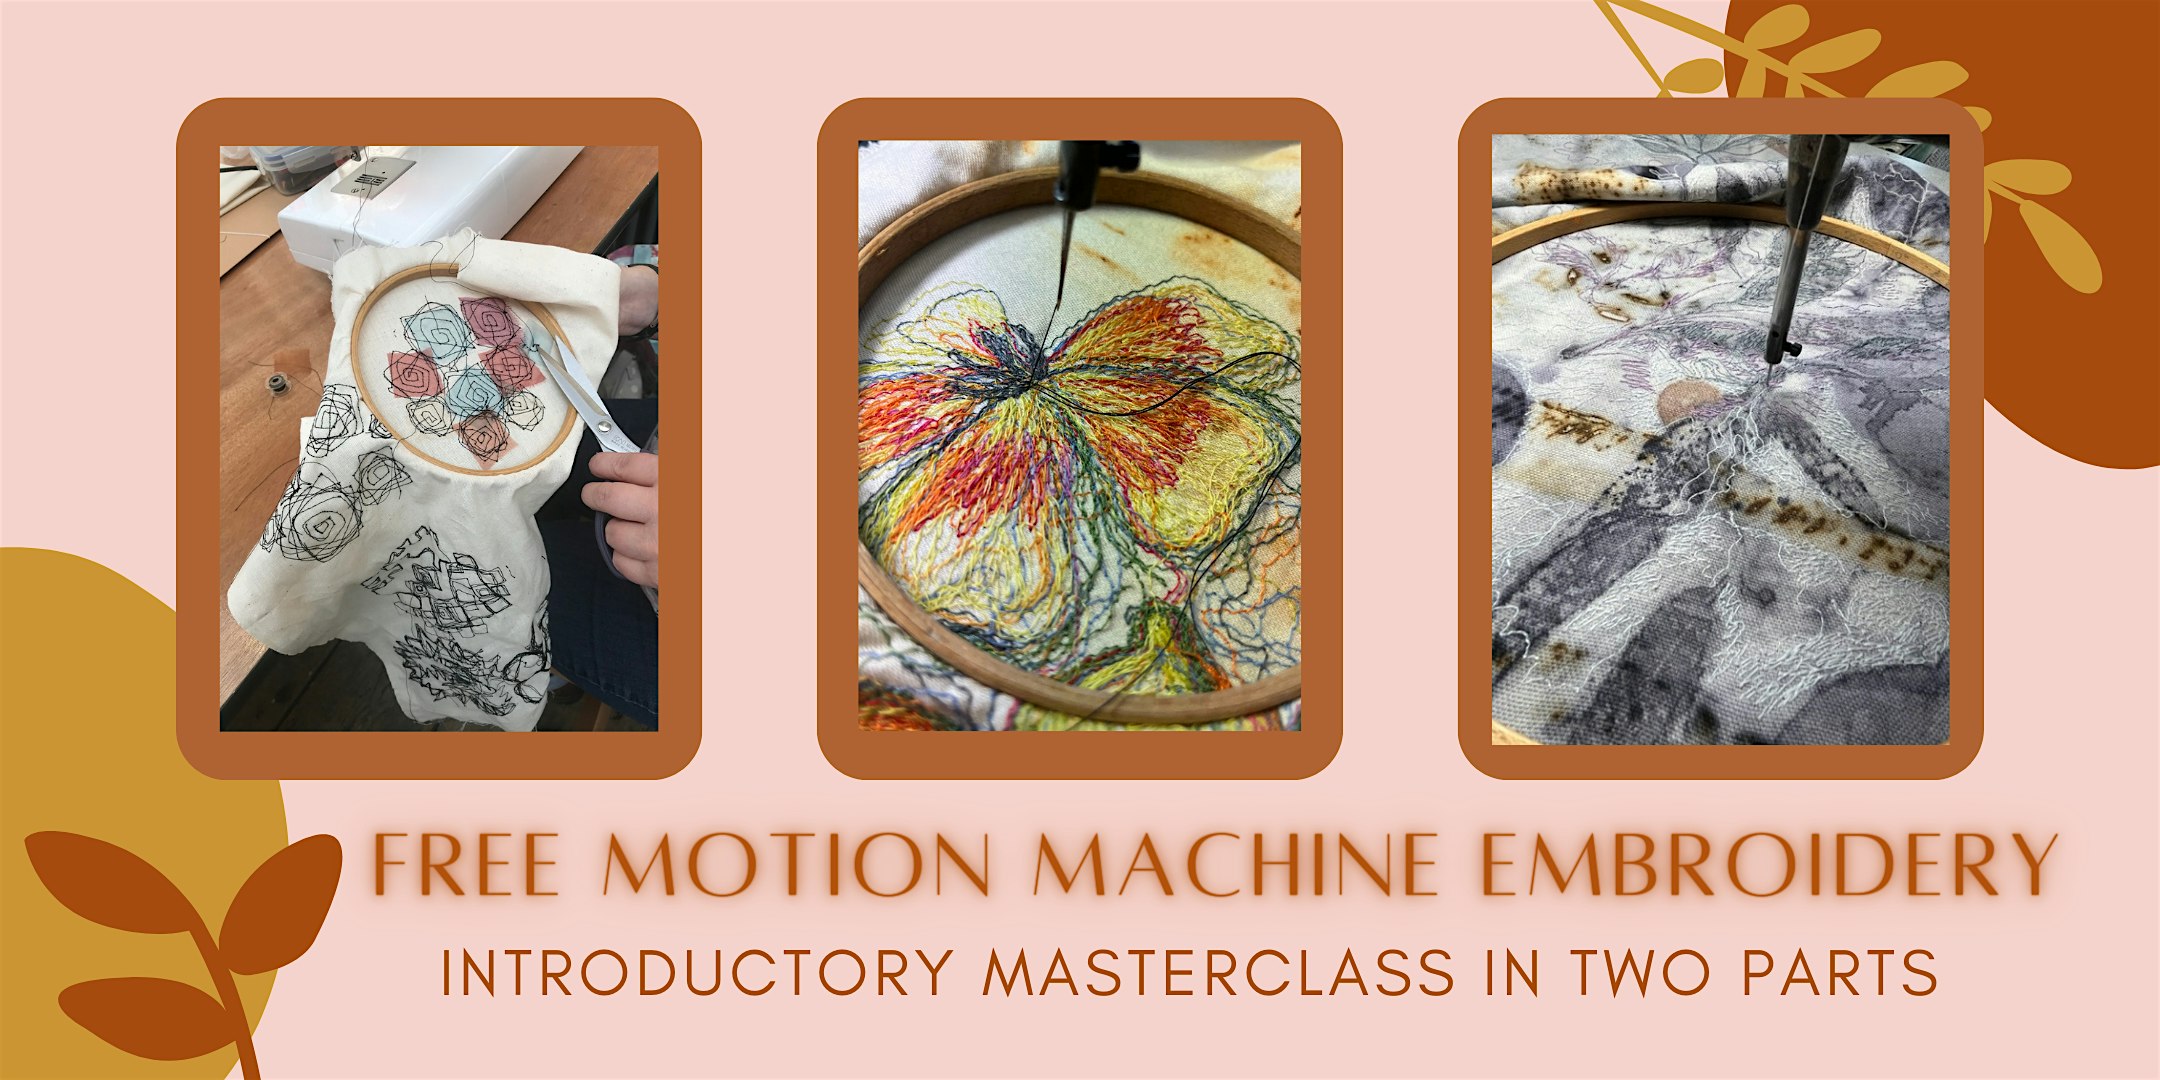 FREE MOTION MACHINE EMBROIDERY – Introductory Masterclass in Two Parts